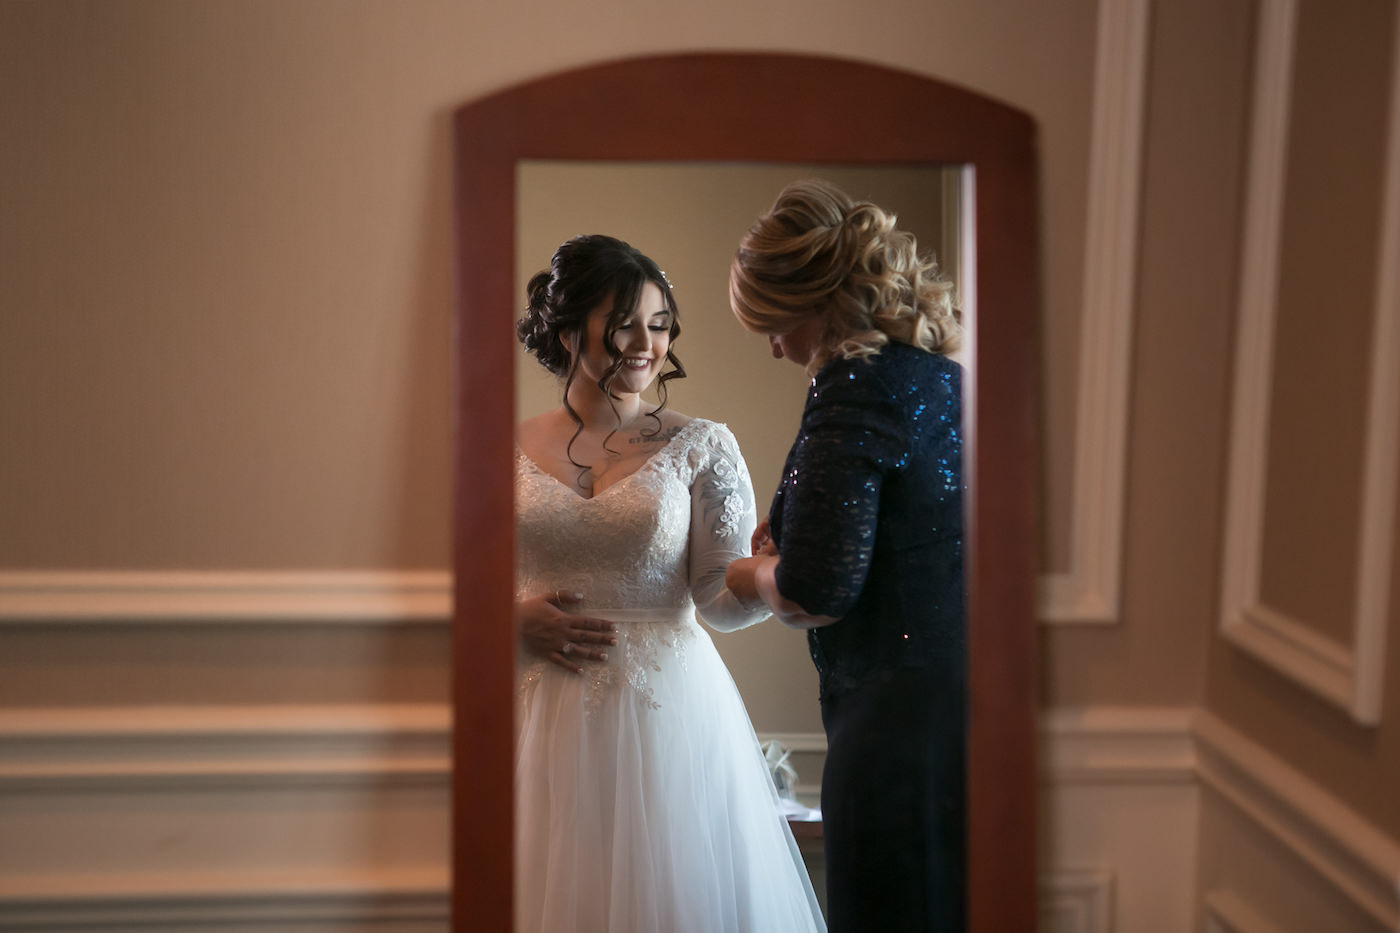 Tampa Bride in Whimsical Lace Long Sleeve V Neckline Empire Waist Wedding Dress with Mom Portrait | Wedding Photographer Carrie Wildes Photography | Wedding Hair and Makeup Michele Renee the Studio